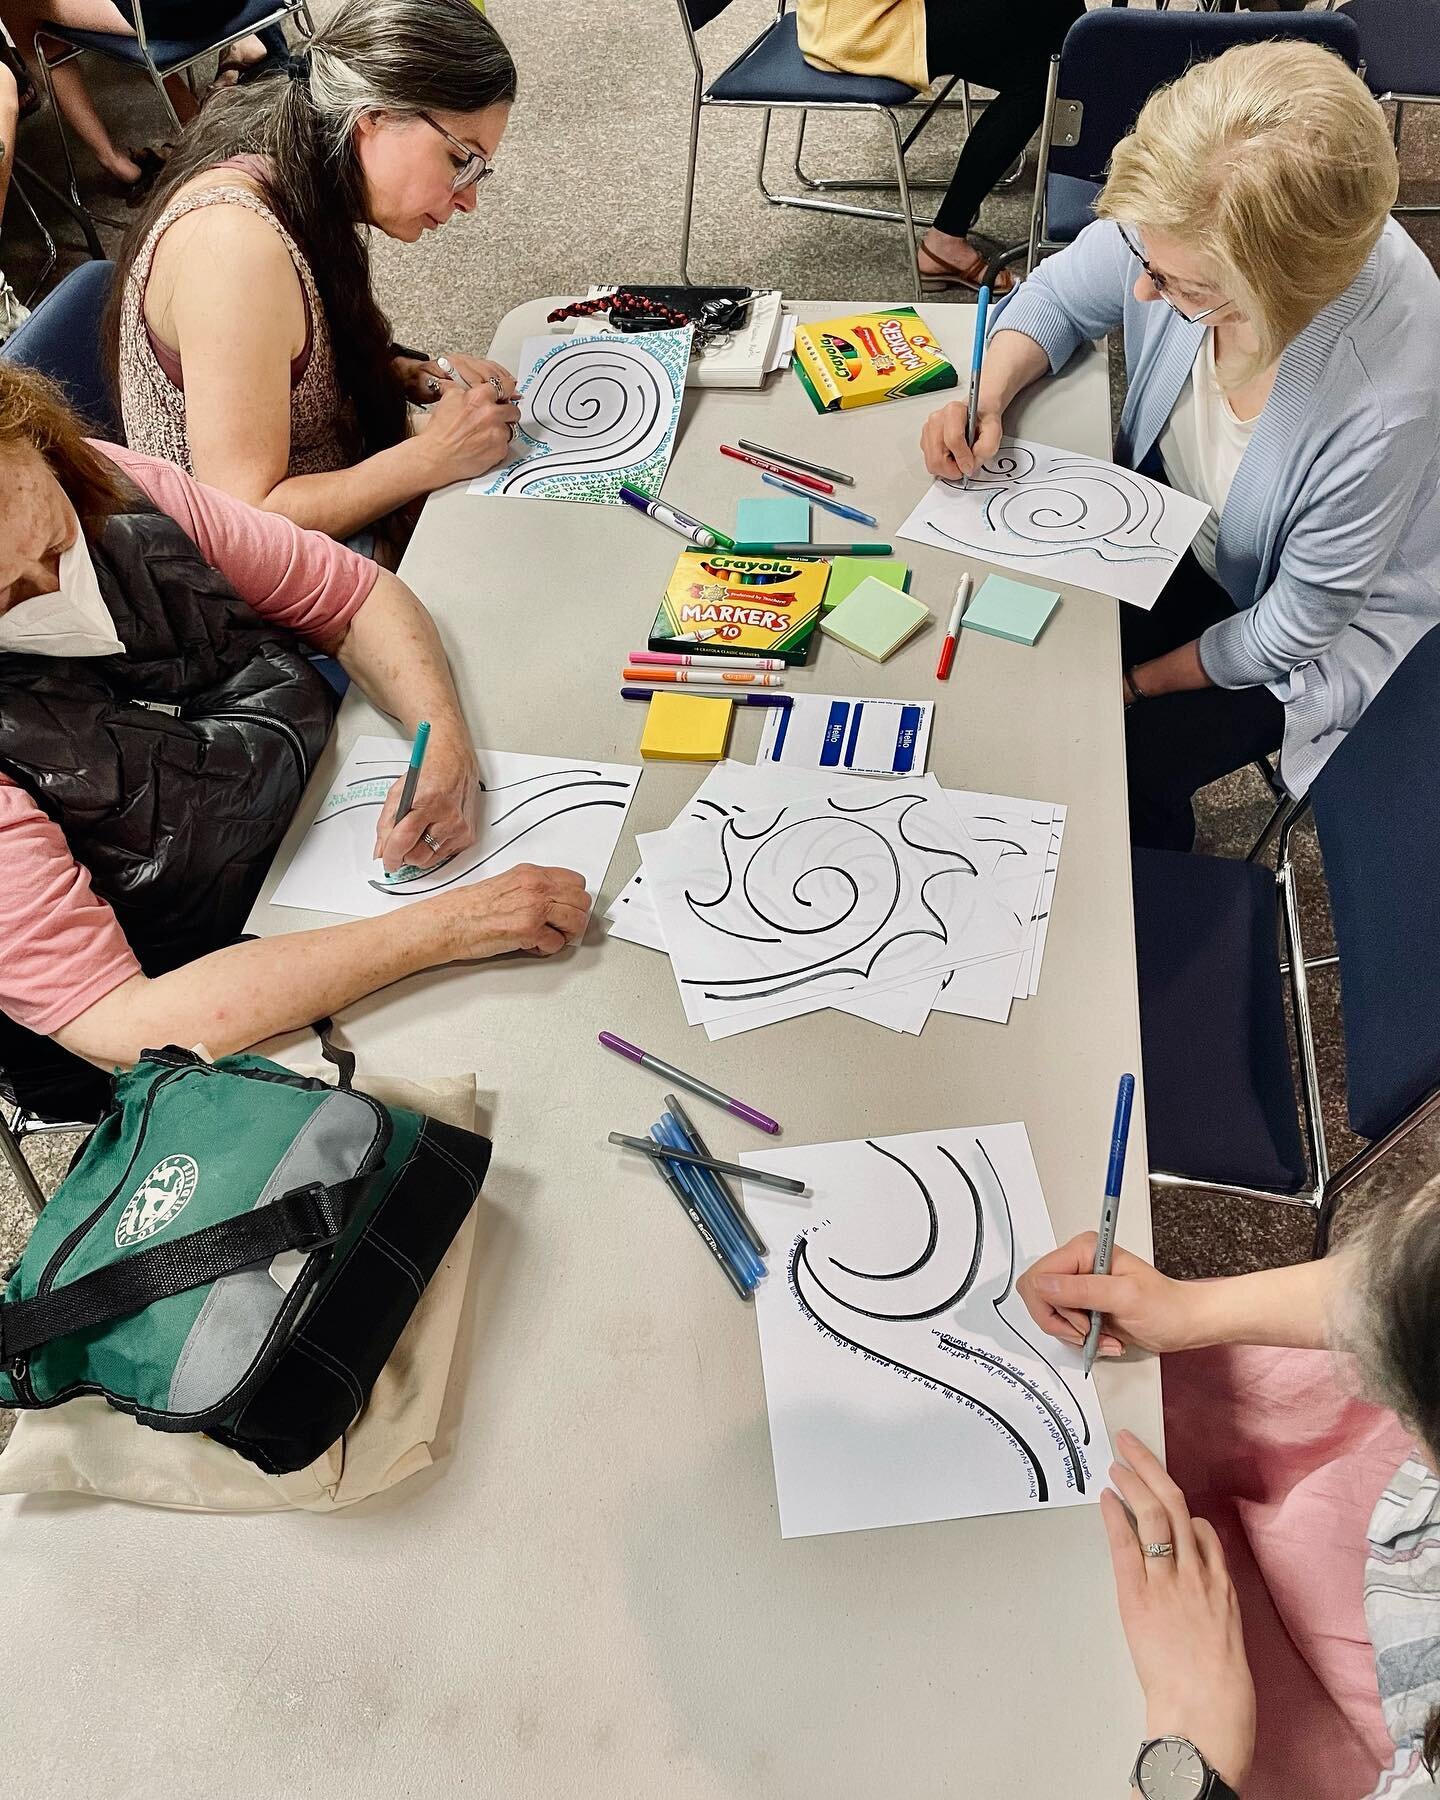 It starts! Phase one: Community design for the Missouri River Community Heritage Mural, &ldquo;Our River Story&rdquo;. We were honored to participate in 2 listening sessions at the public library this weekend and are looking forward to diving into de